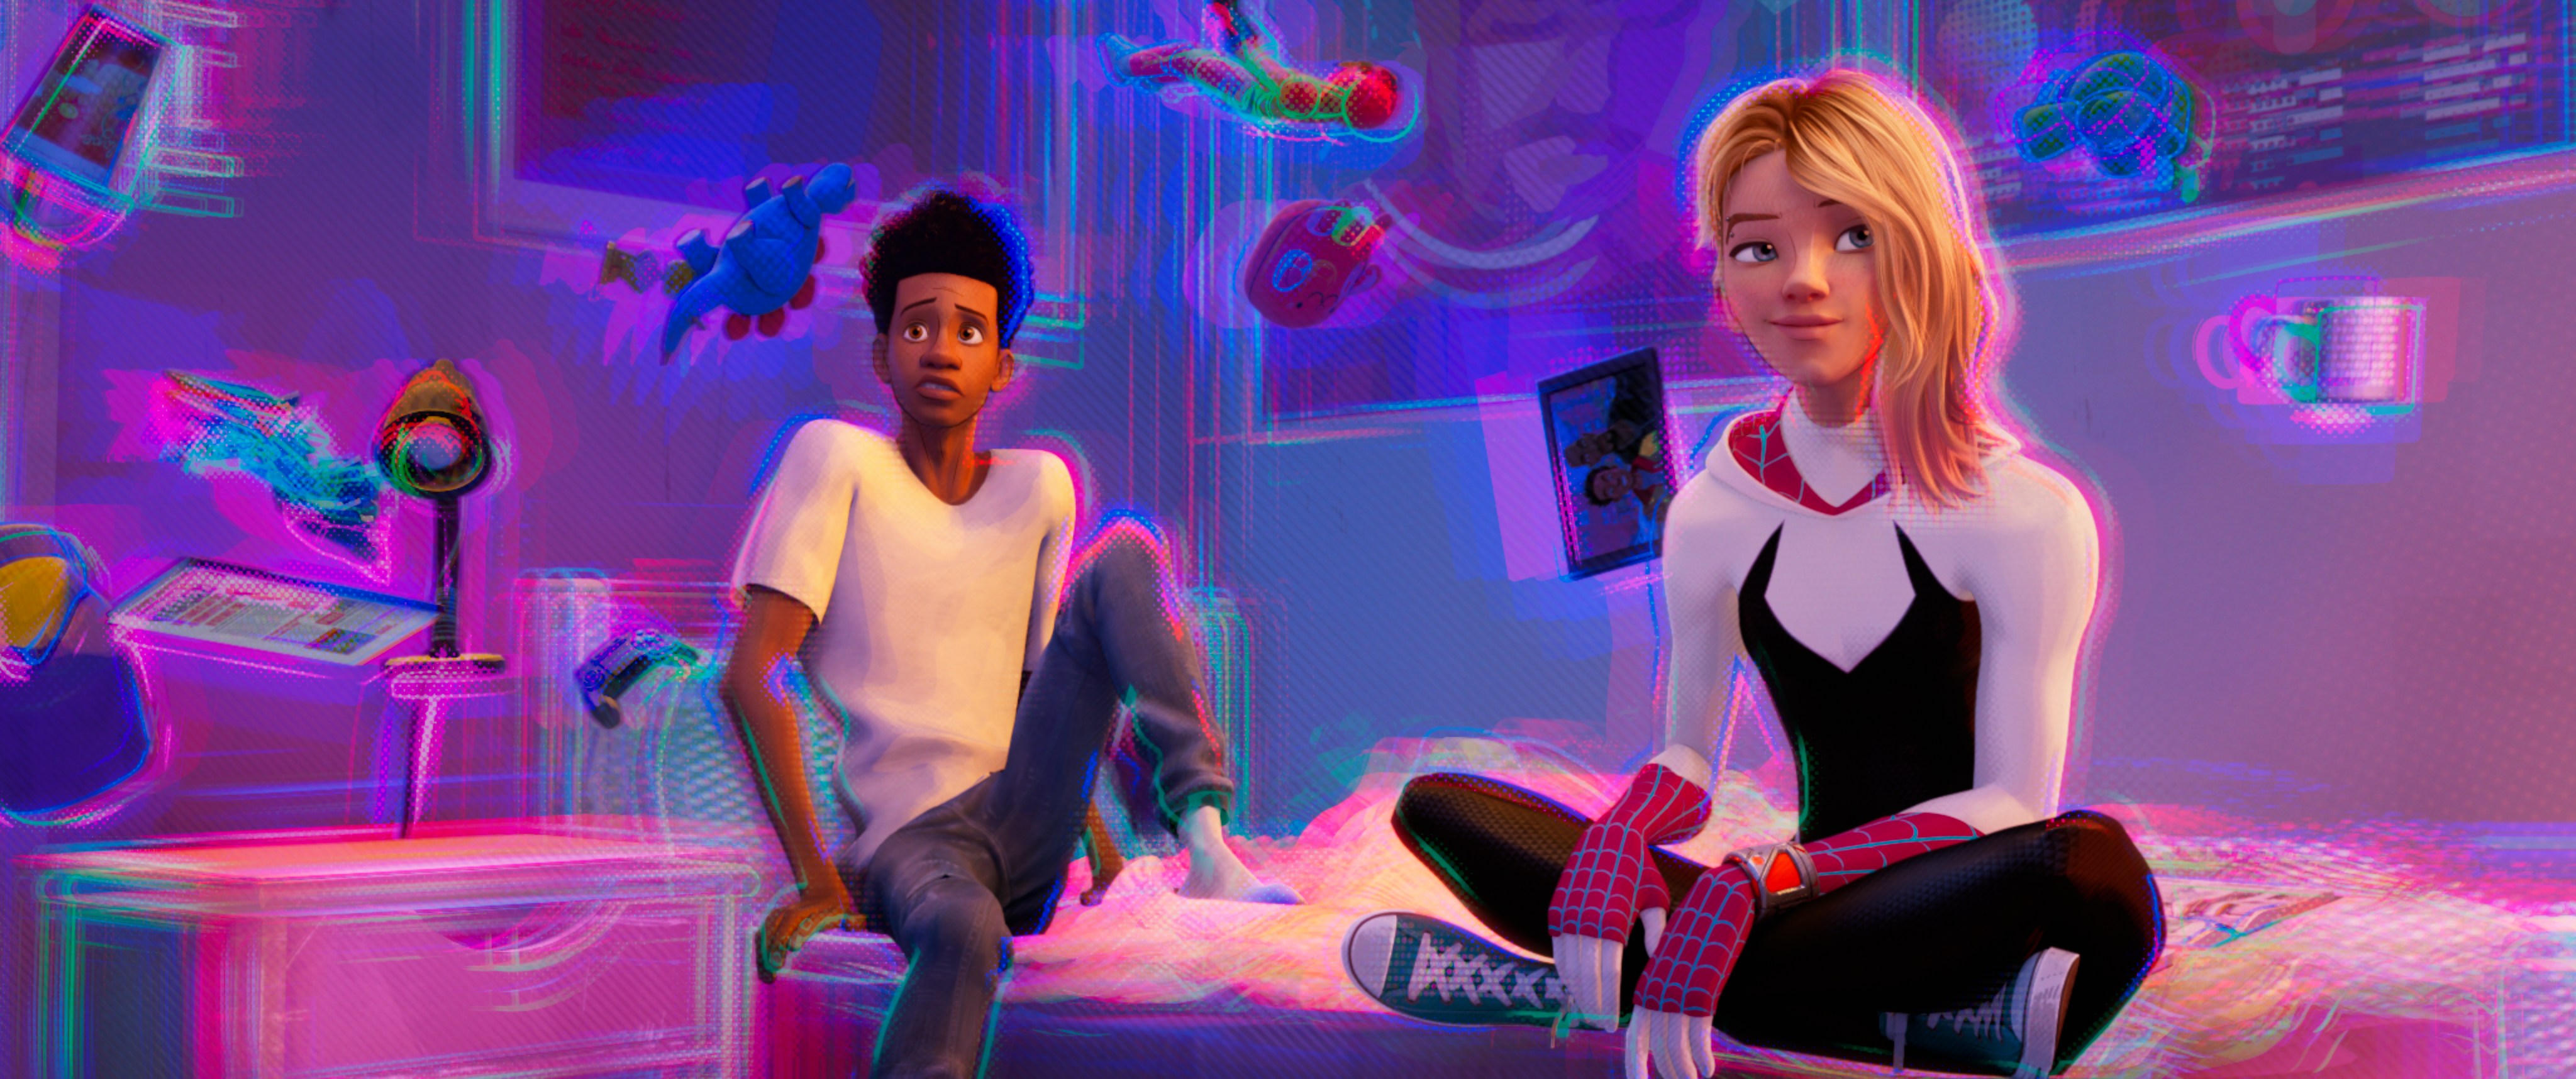 Miles Morales (Shameik Moore) and Gwen Stacy (Hailee Steinfeld) en Spider-Man™: Across the Spider-Verse (Parte uno). (Sony Pictures Animation)